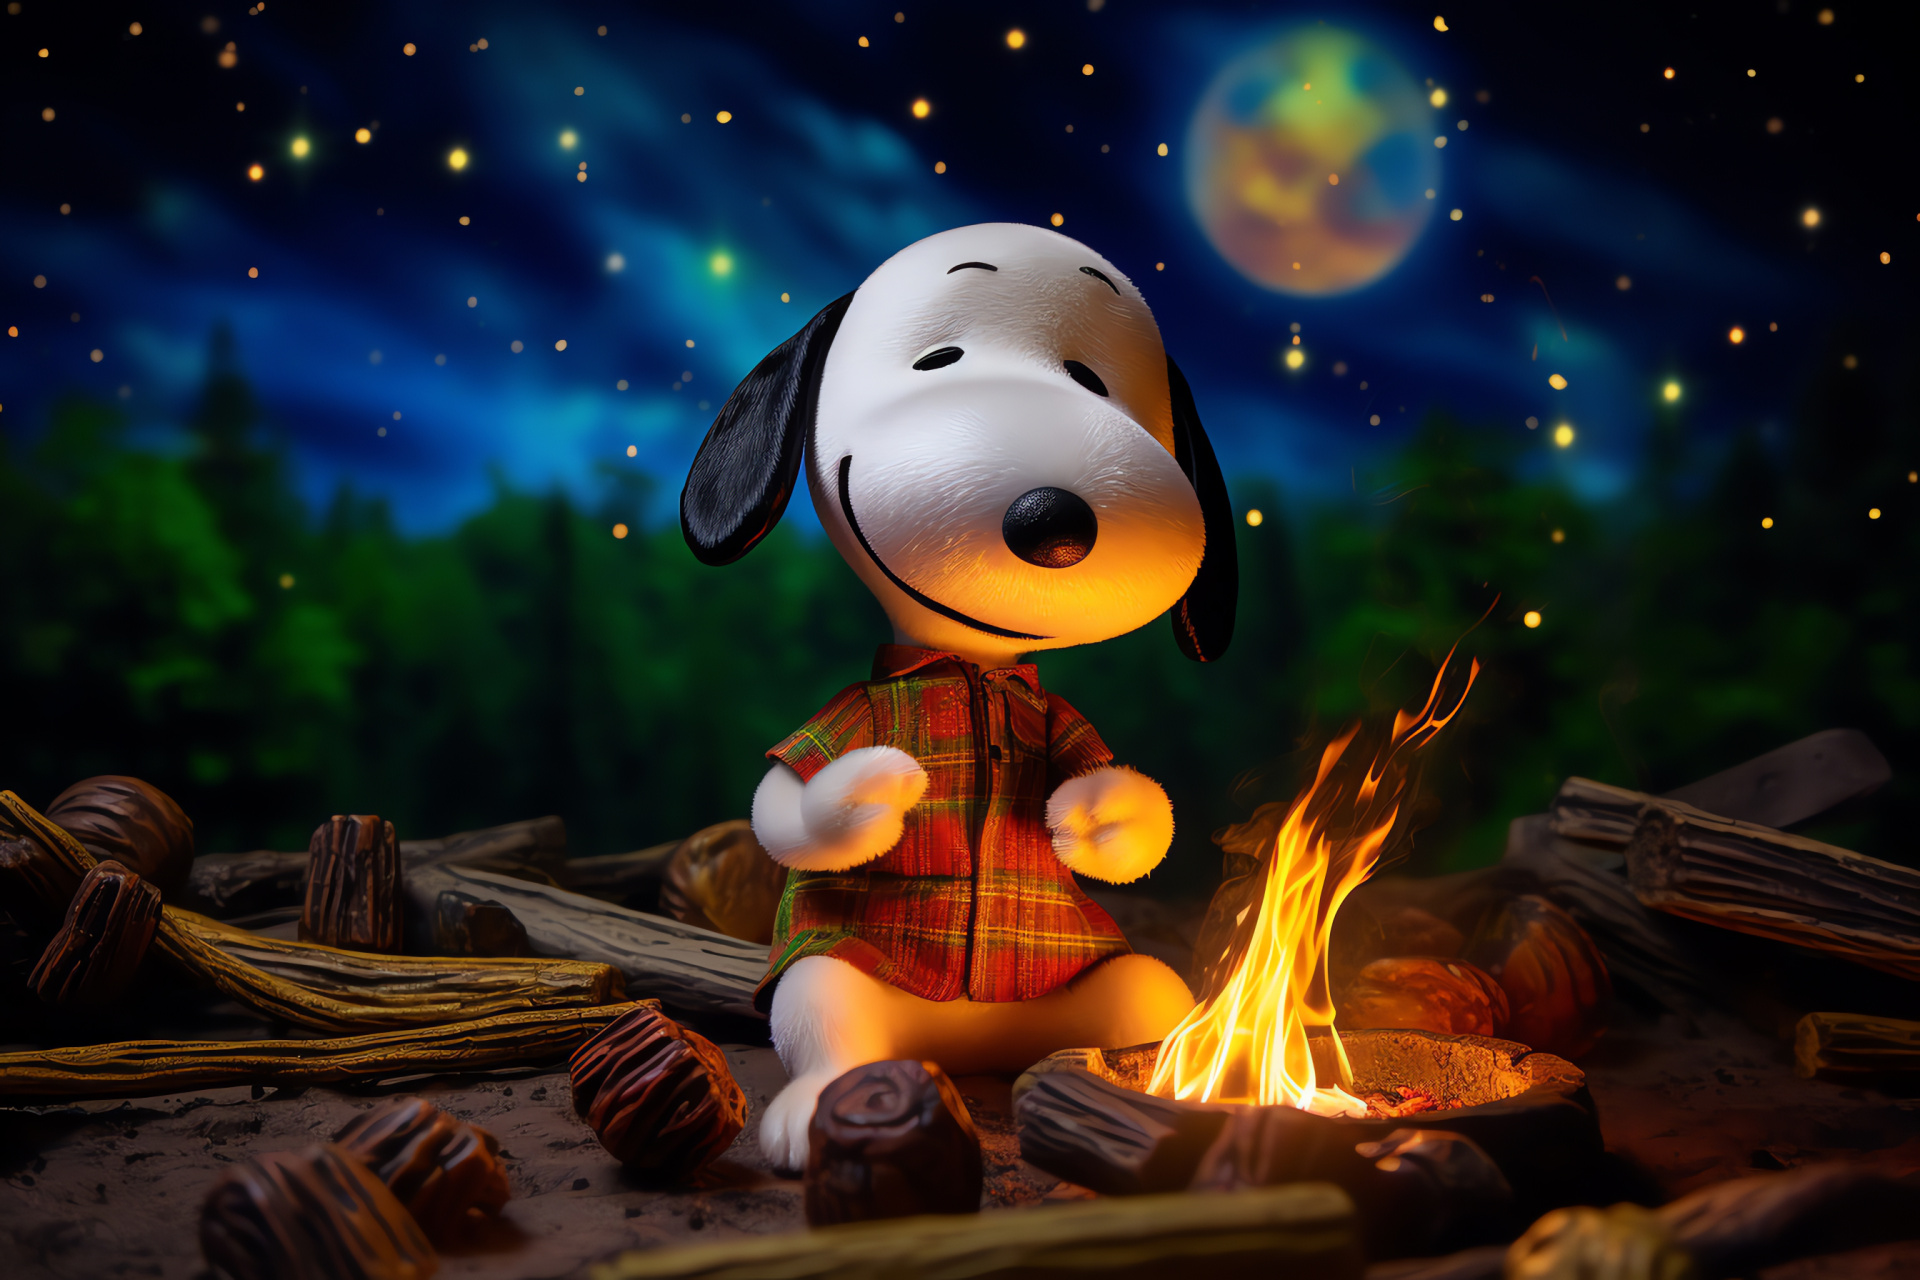 Snoopy July 4th night, Outdoor campfire, Astral sky, Sweet treats, Radiant warmth, HD Desktop Image